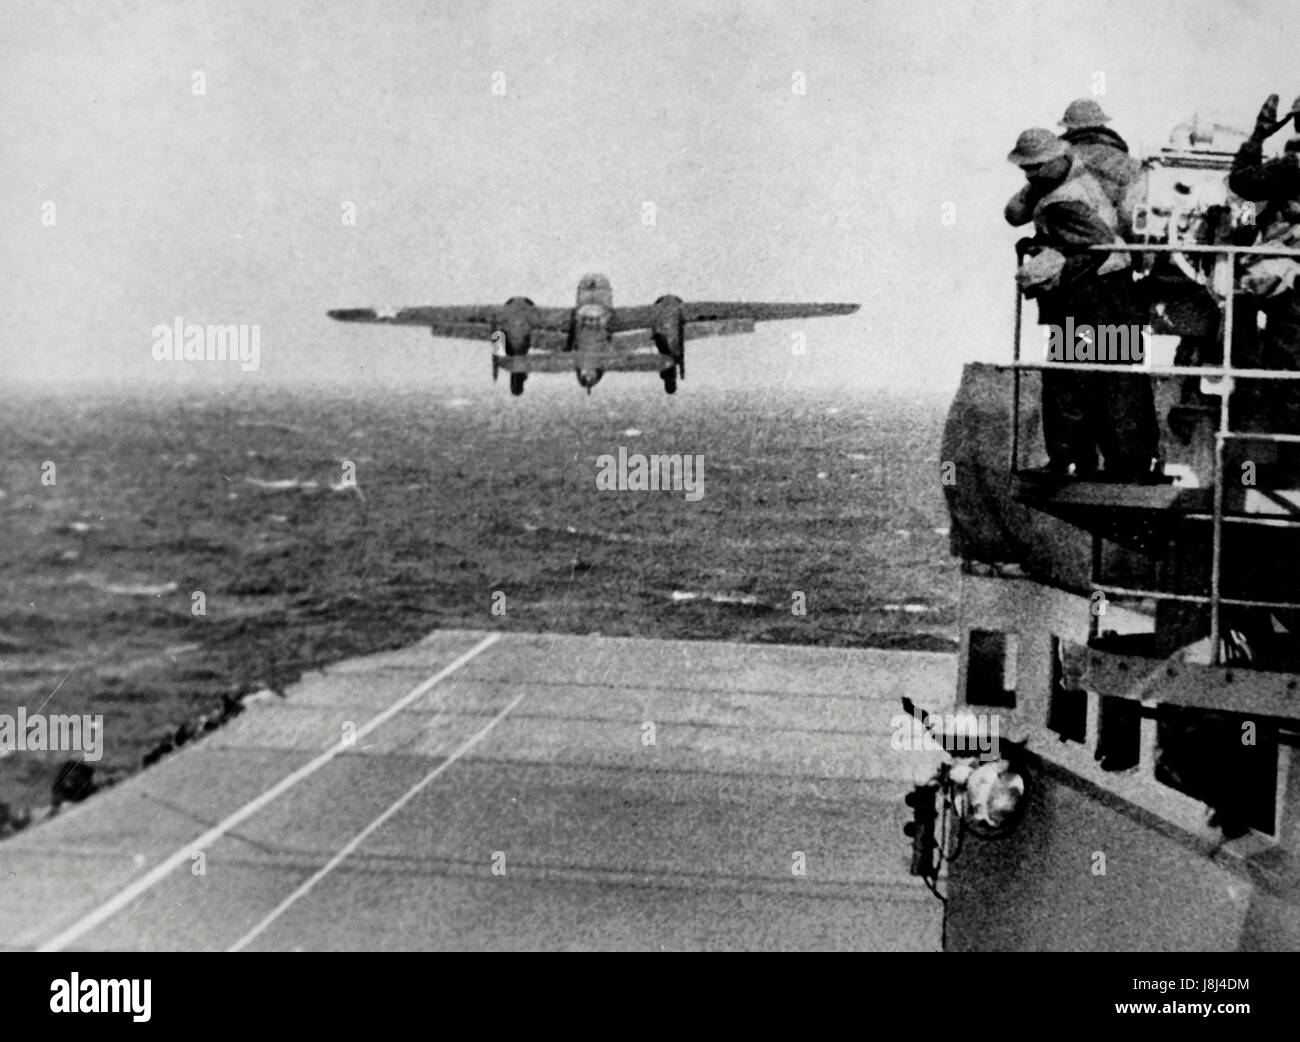 A U.S. Army Air Forces North American B-25B Mitchell bomber takes off from the aircraft carrier USS Hornet (CV-8) during the 'Doolittle Raid'. April 1942 Stock Photo